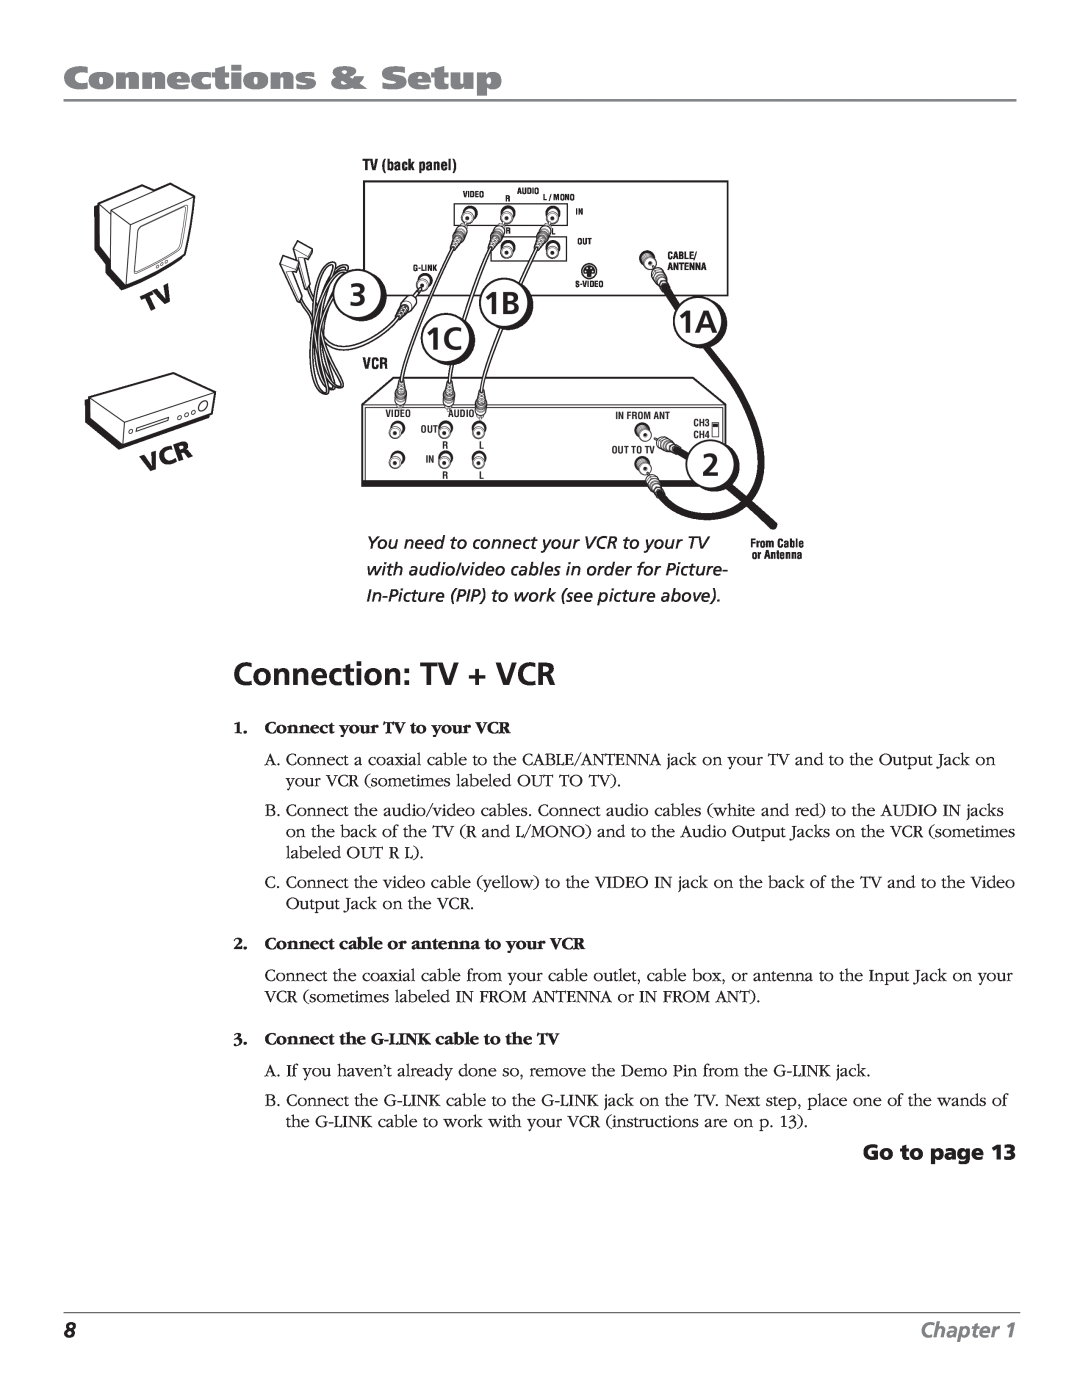 RCA F27669 manual Connection TV + VCR, Connections & Setup, Go to page, Chapter, You need to connect your VCR to your TV 